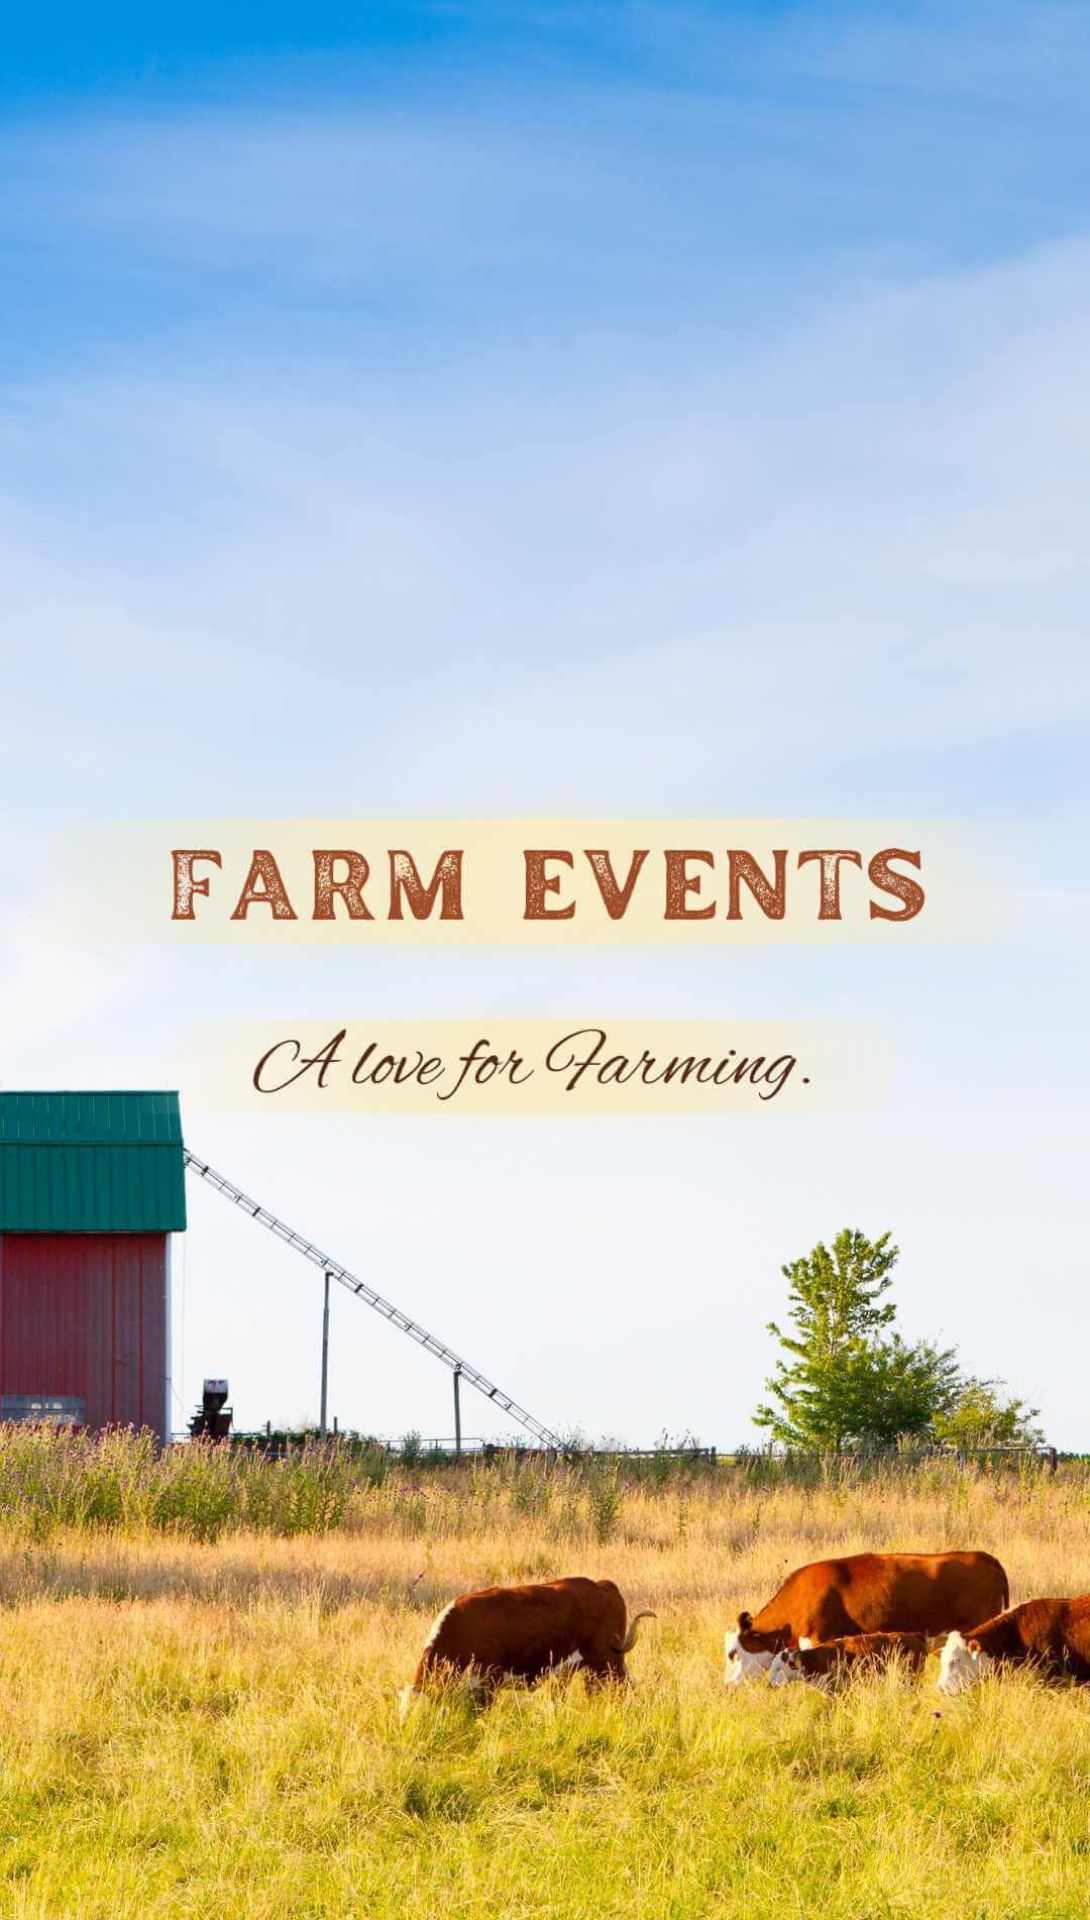 Dairy cows grazing on farmland with red barn and blue skies in the background, text displaying "farm events a love for farming"